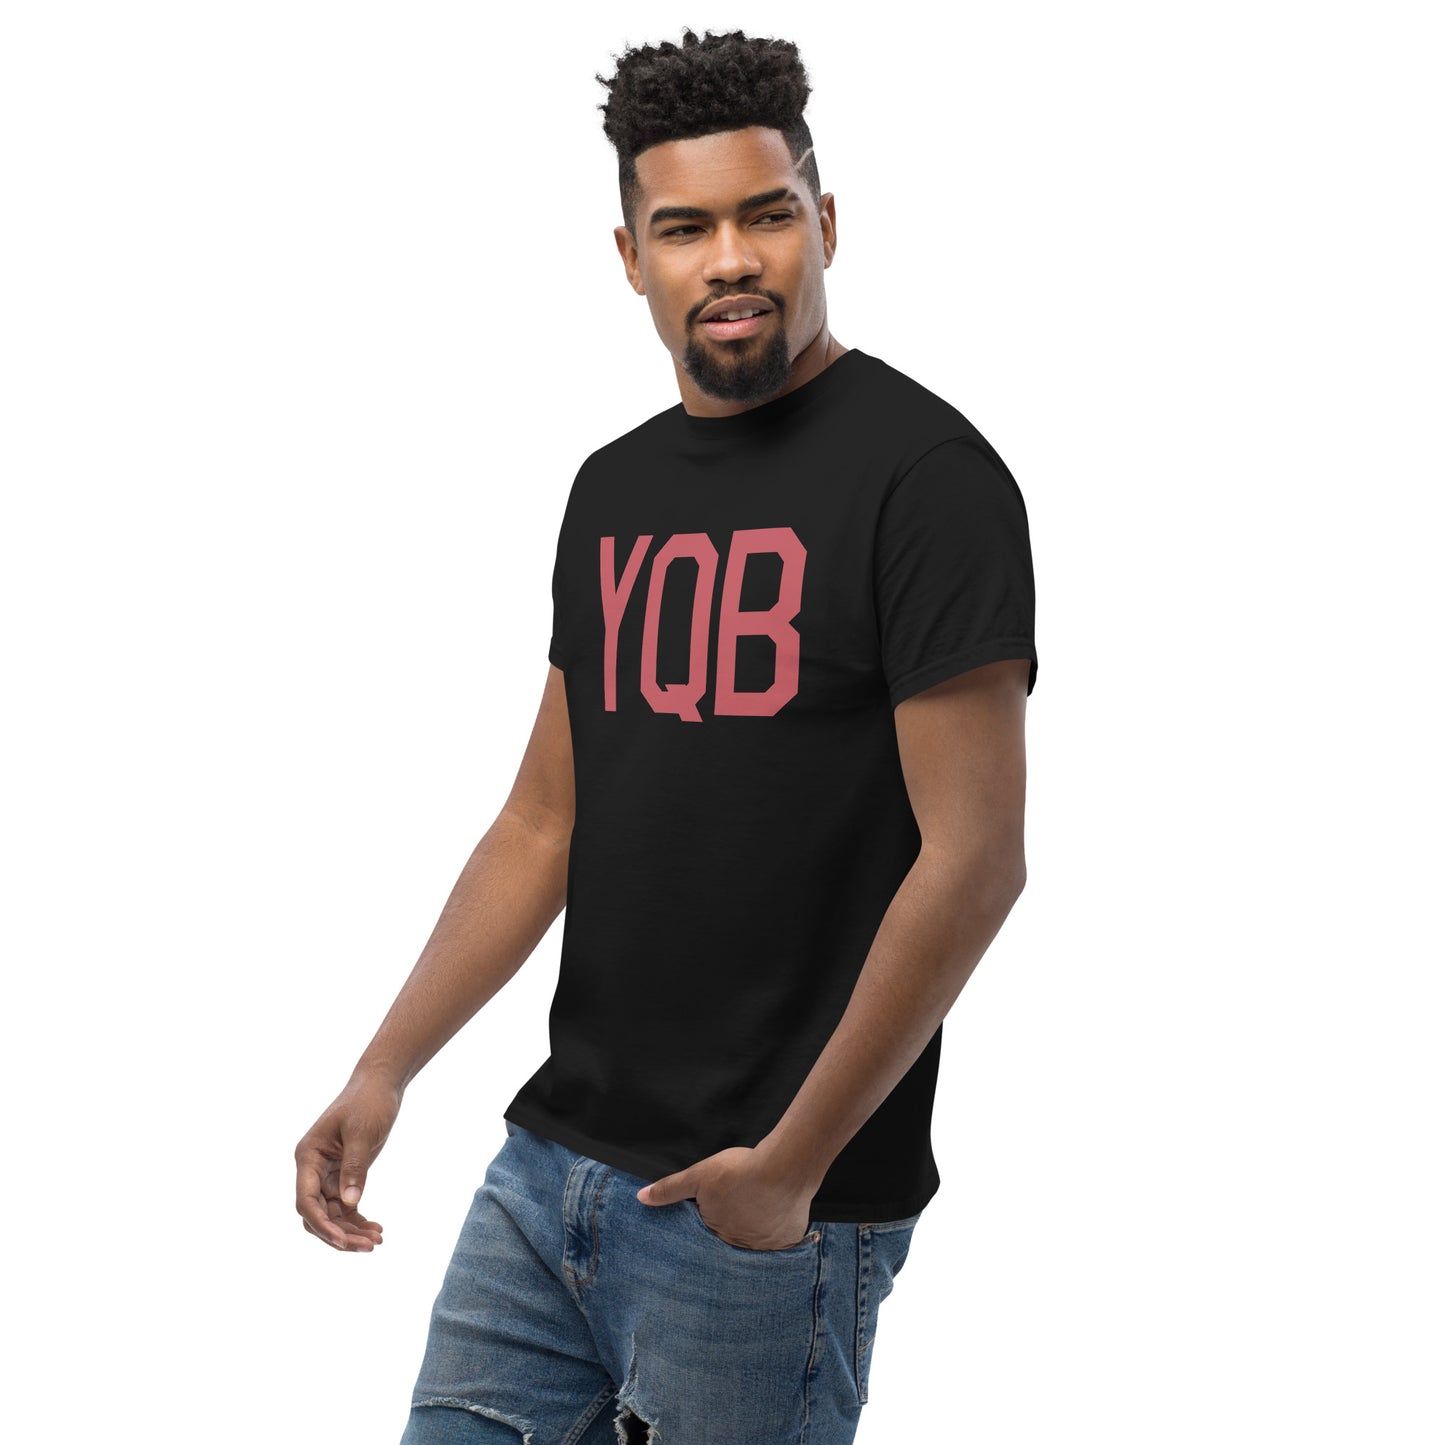 Aviation Enthusiast Men's Tee - Deep Pink Graphic • YQB Quebec City • YHM Designs - Image 07